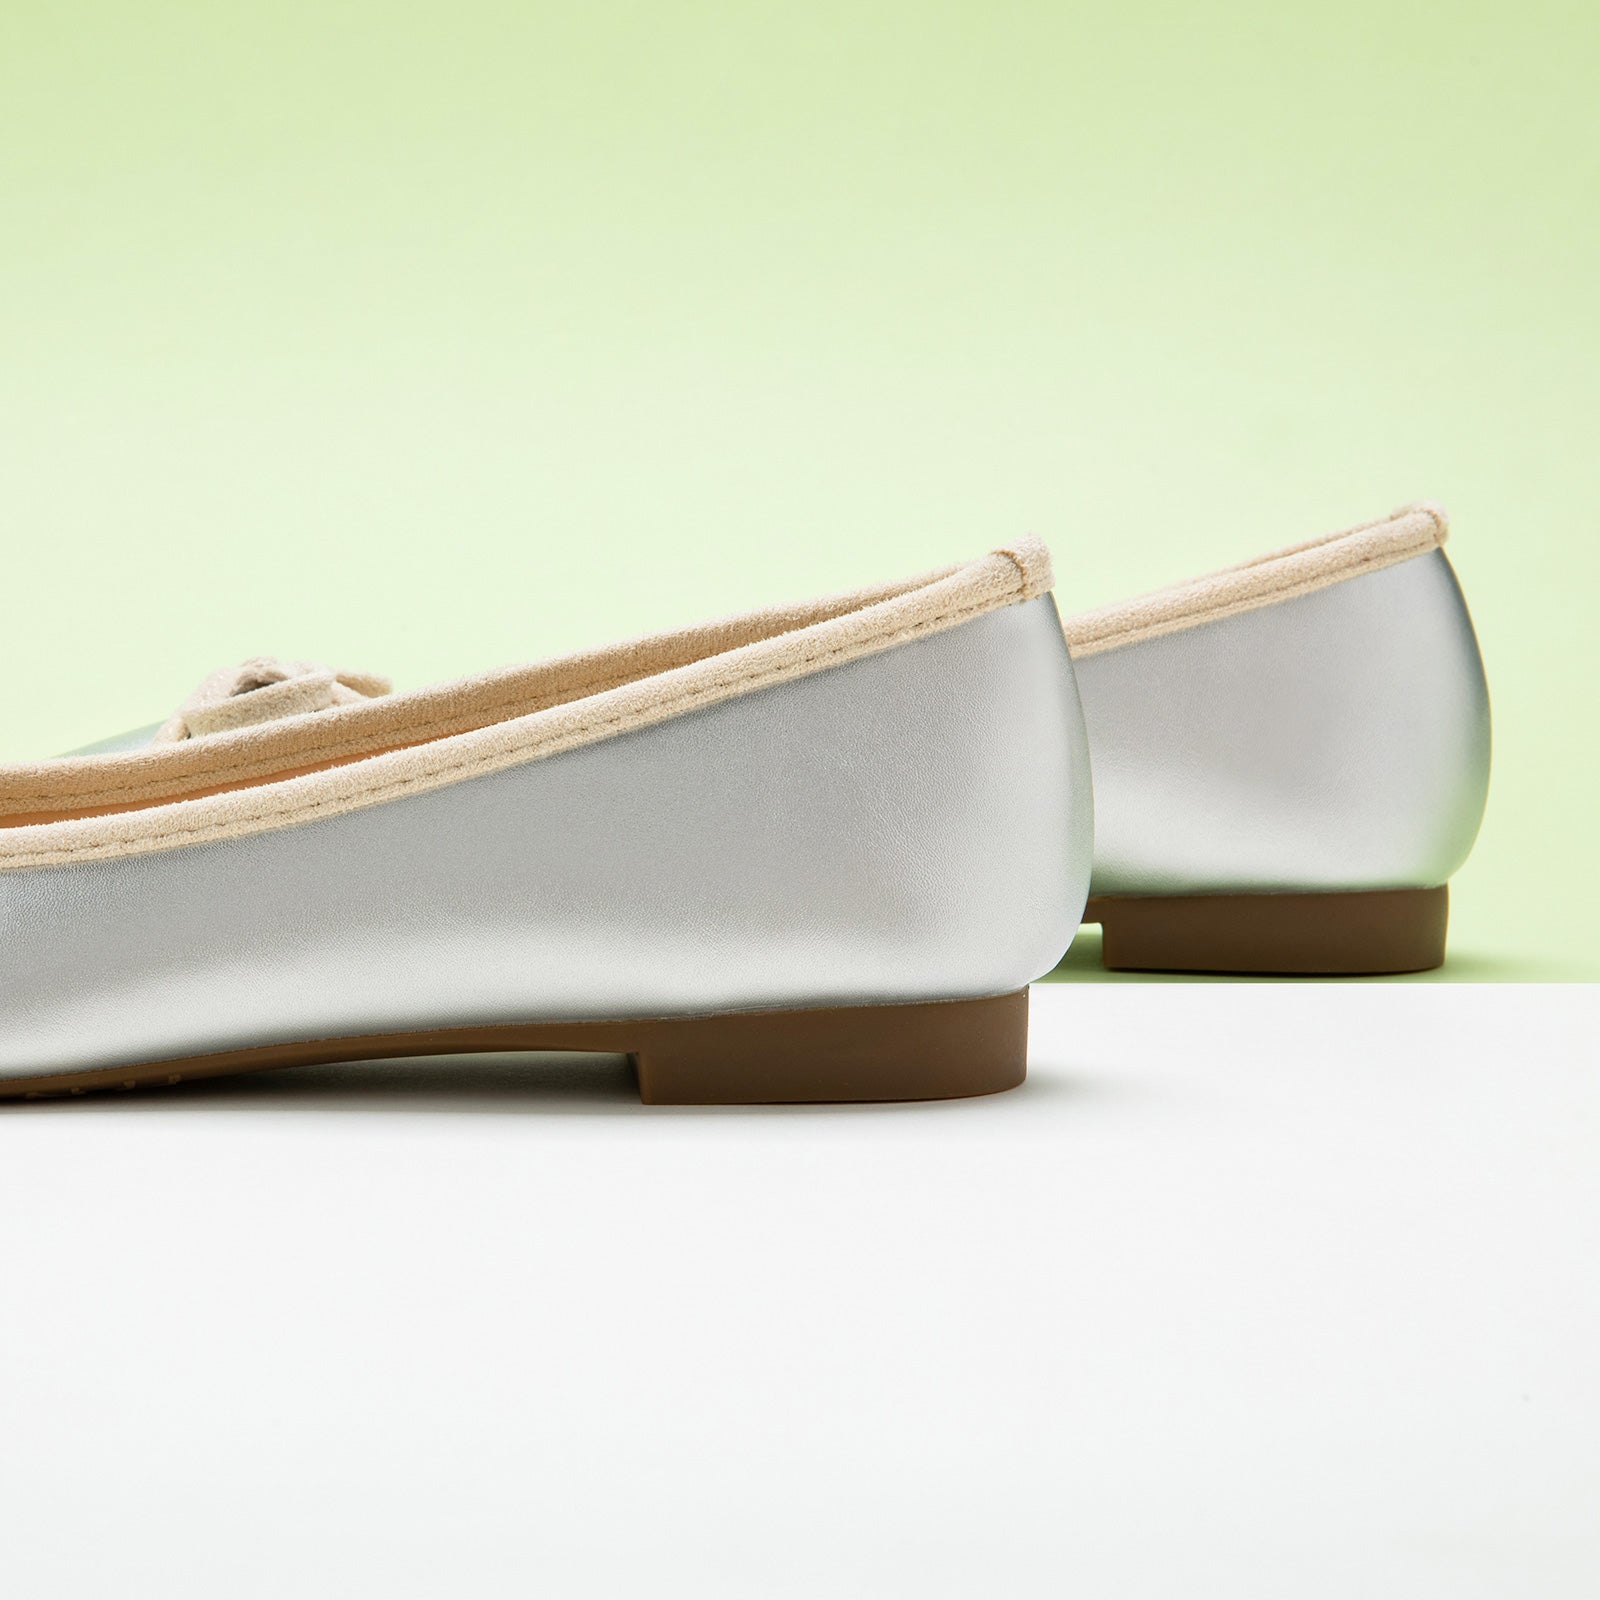 Silver Suede Ballet Flats with a charming bow detail, offering a chic and stylish option for special occasions